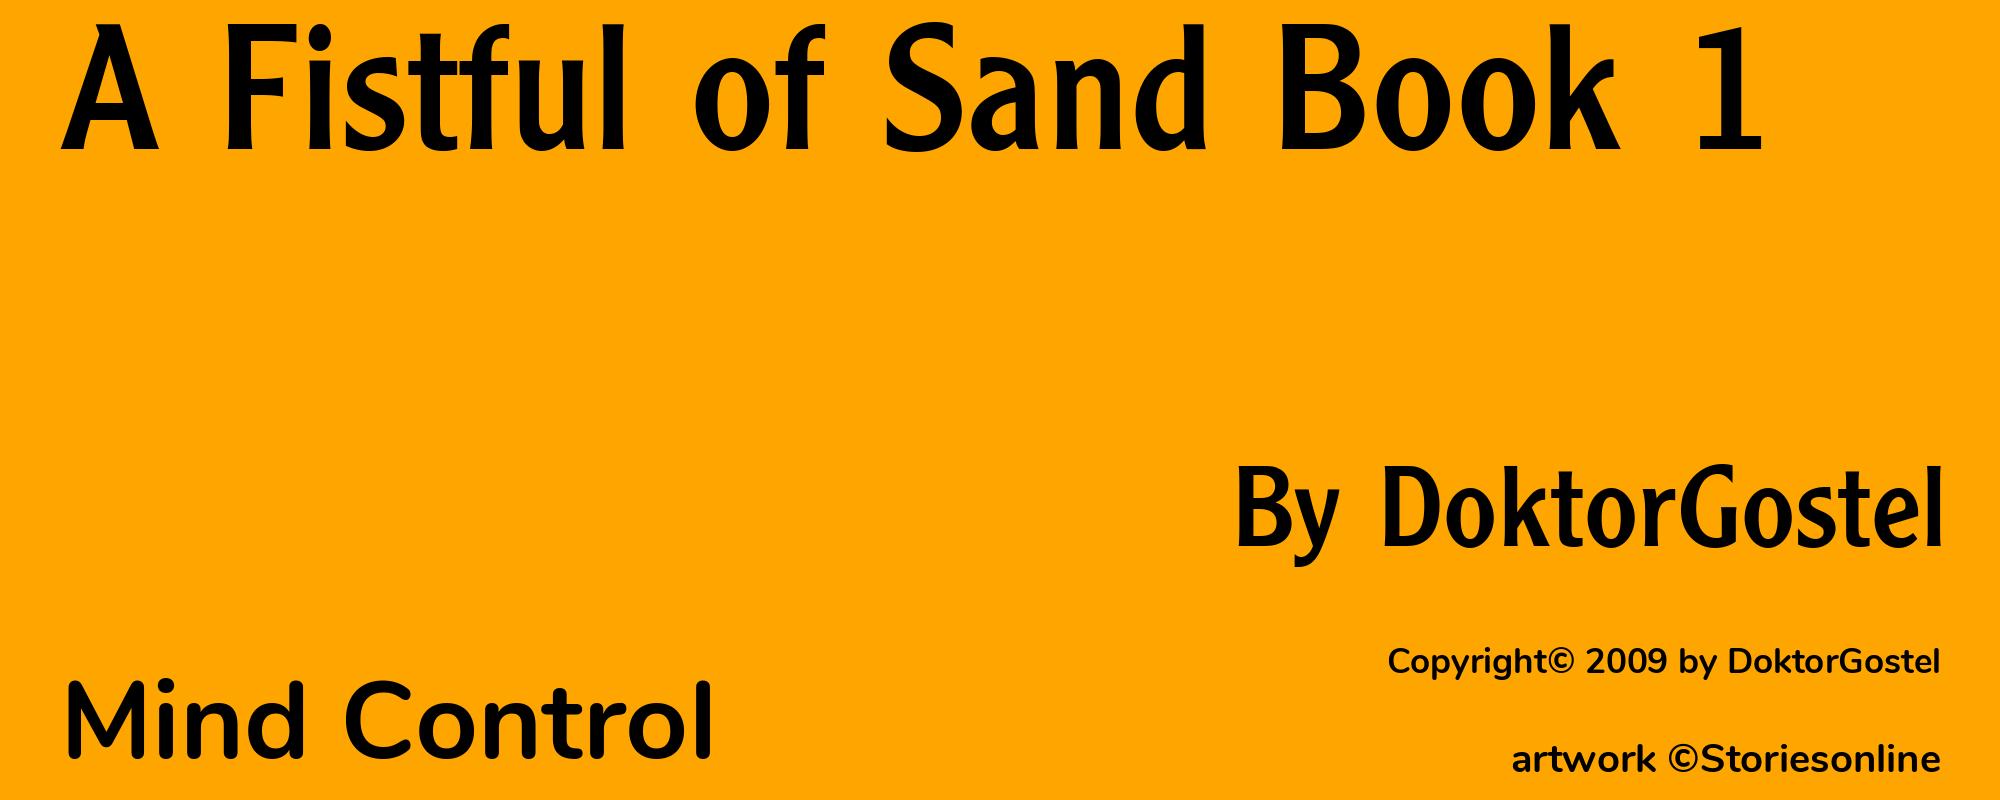 A Fistful of Sand Book 1 - Cover